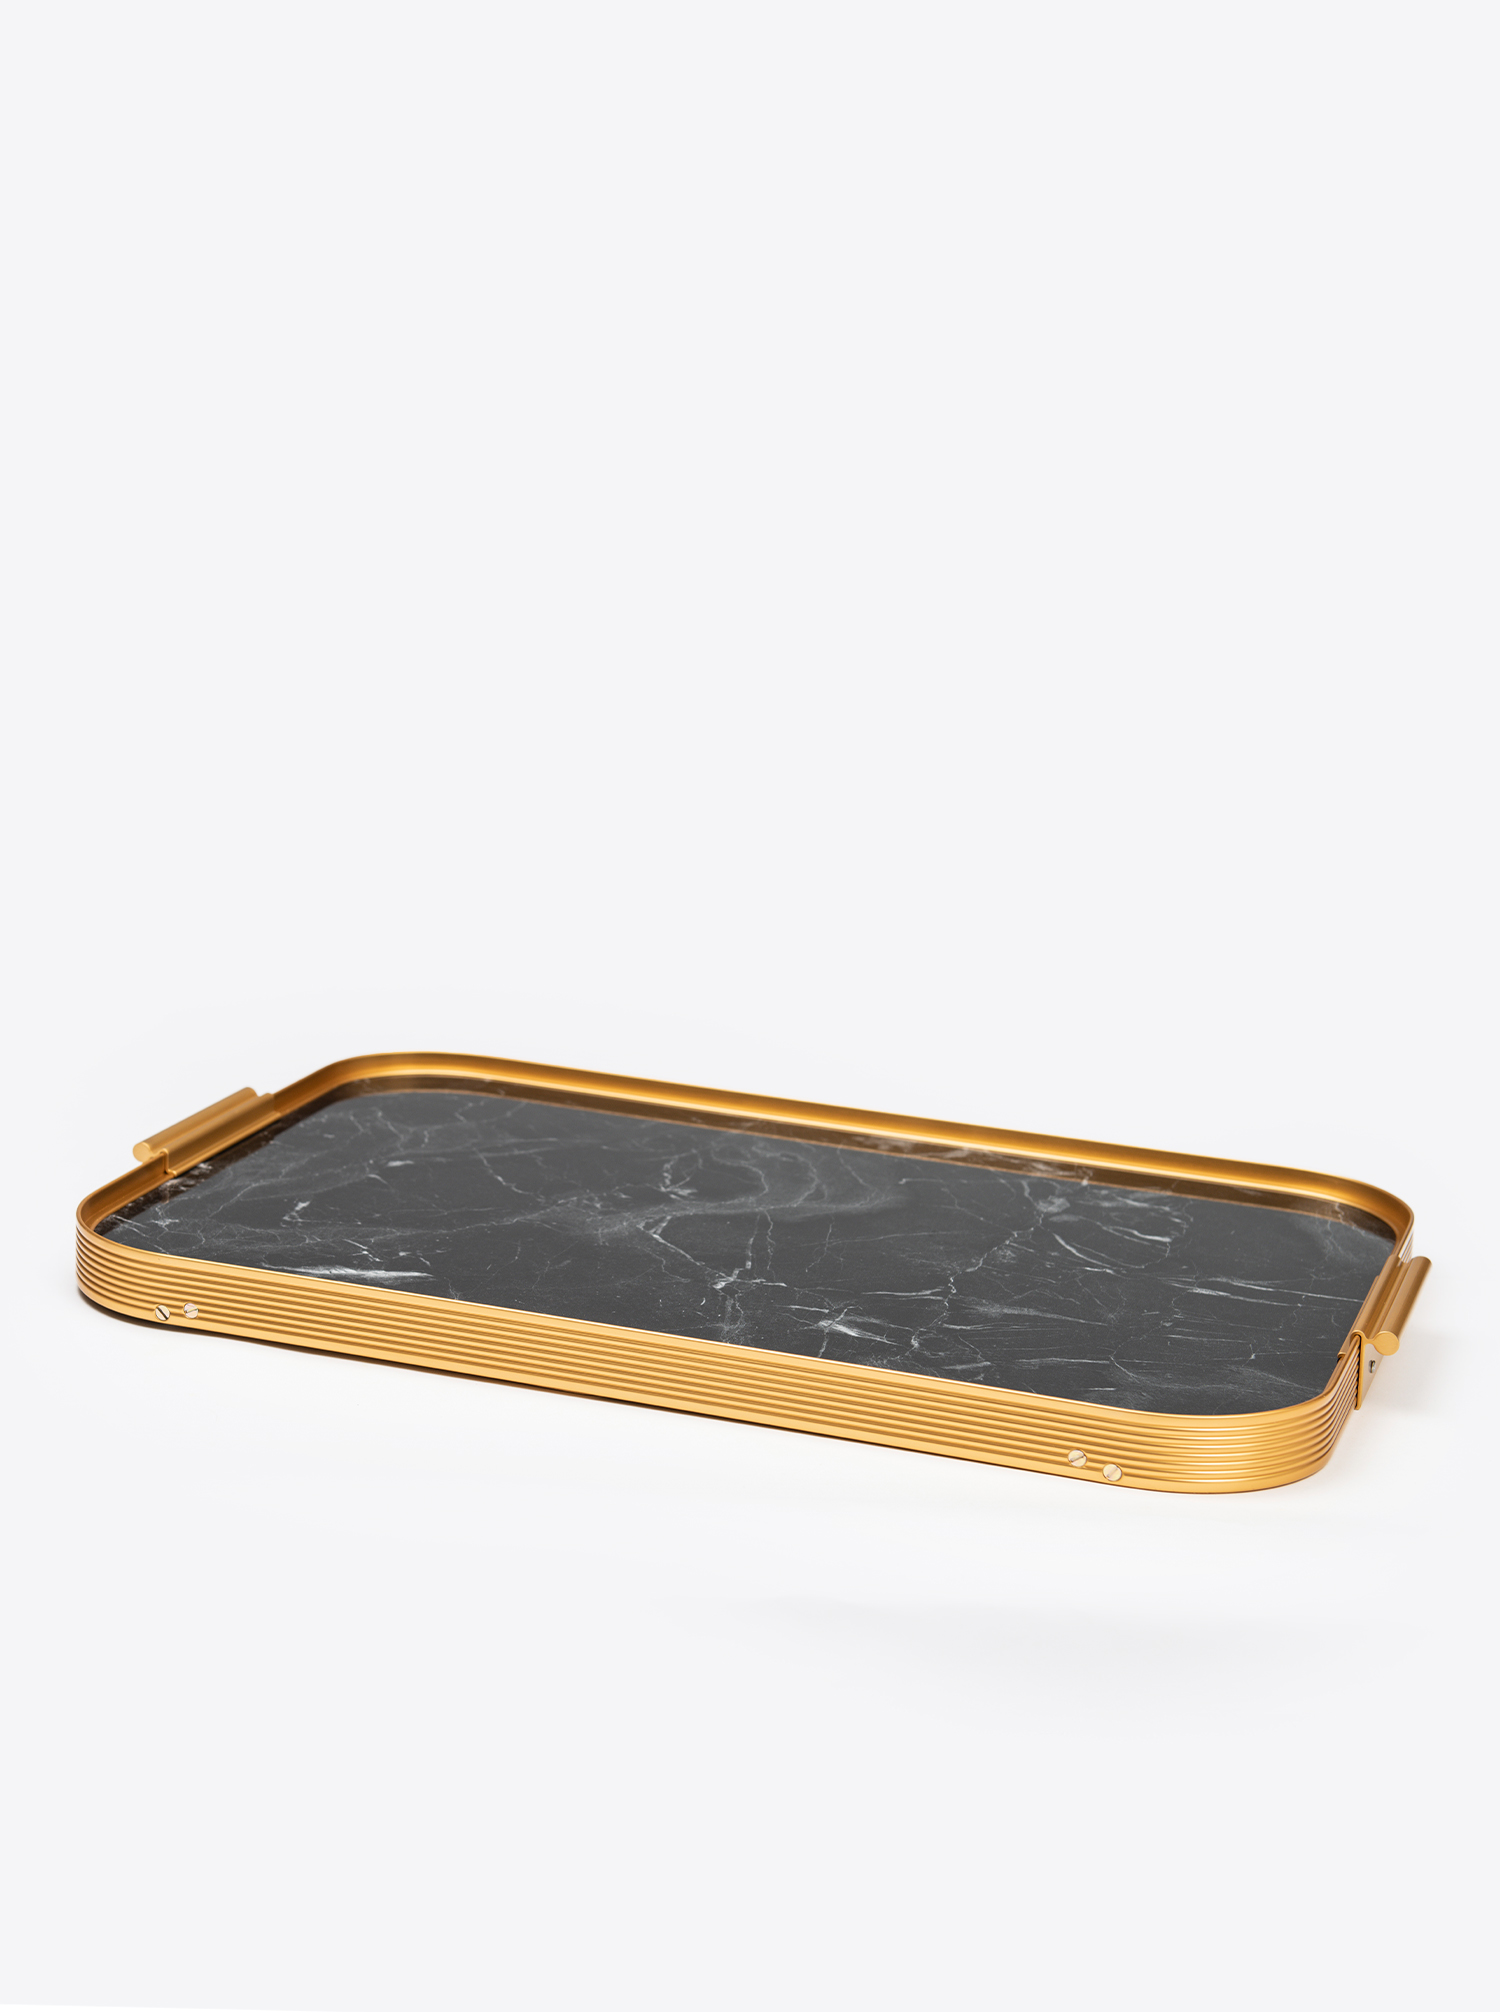 Bed Tray 51 x 33 cm / Lap Tray &quot;Marble Black&quot;